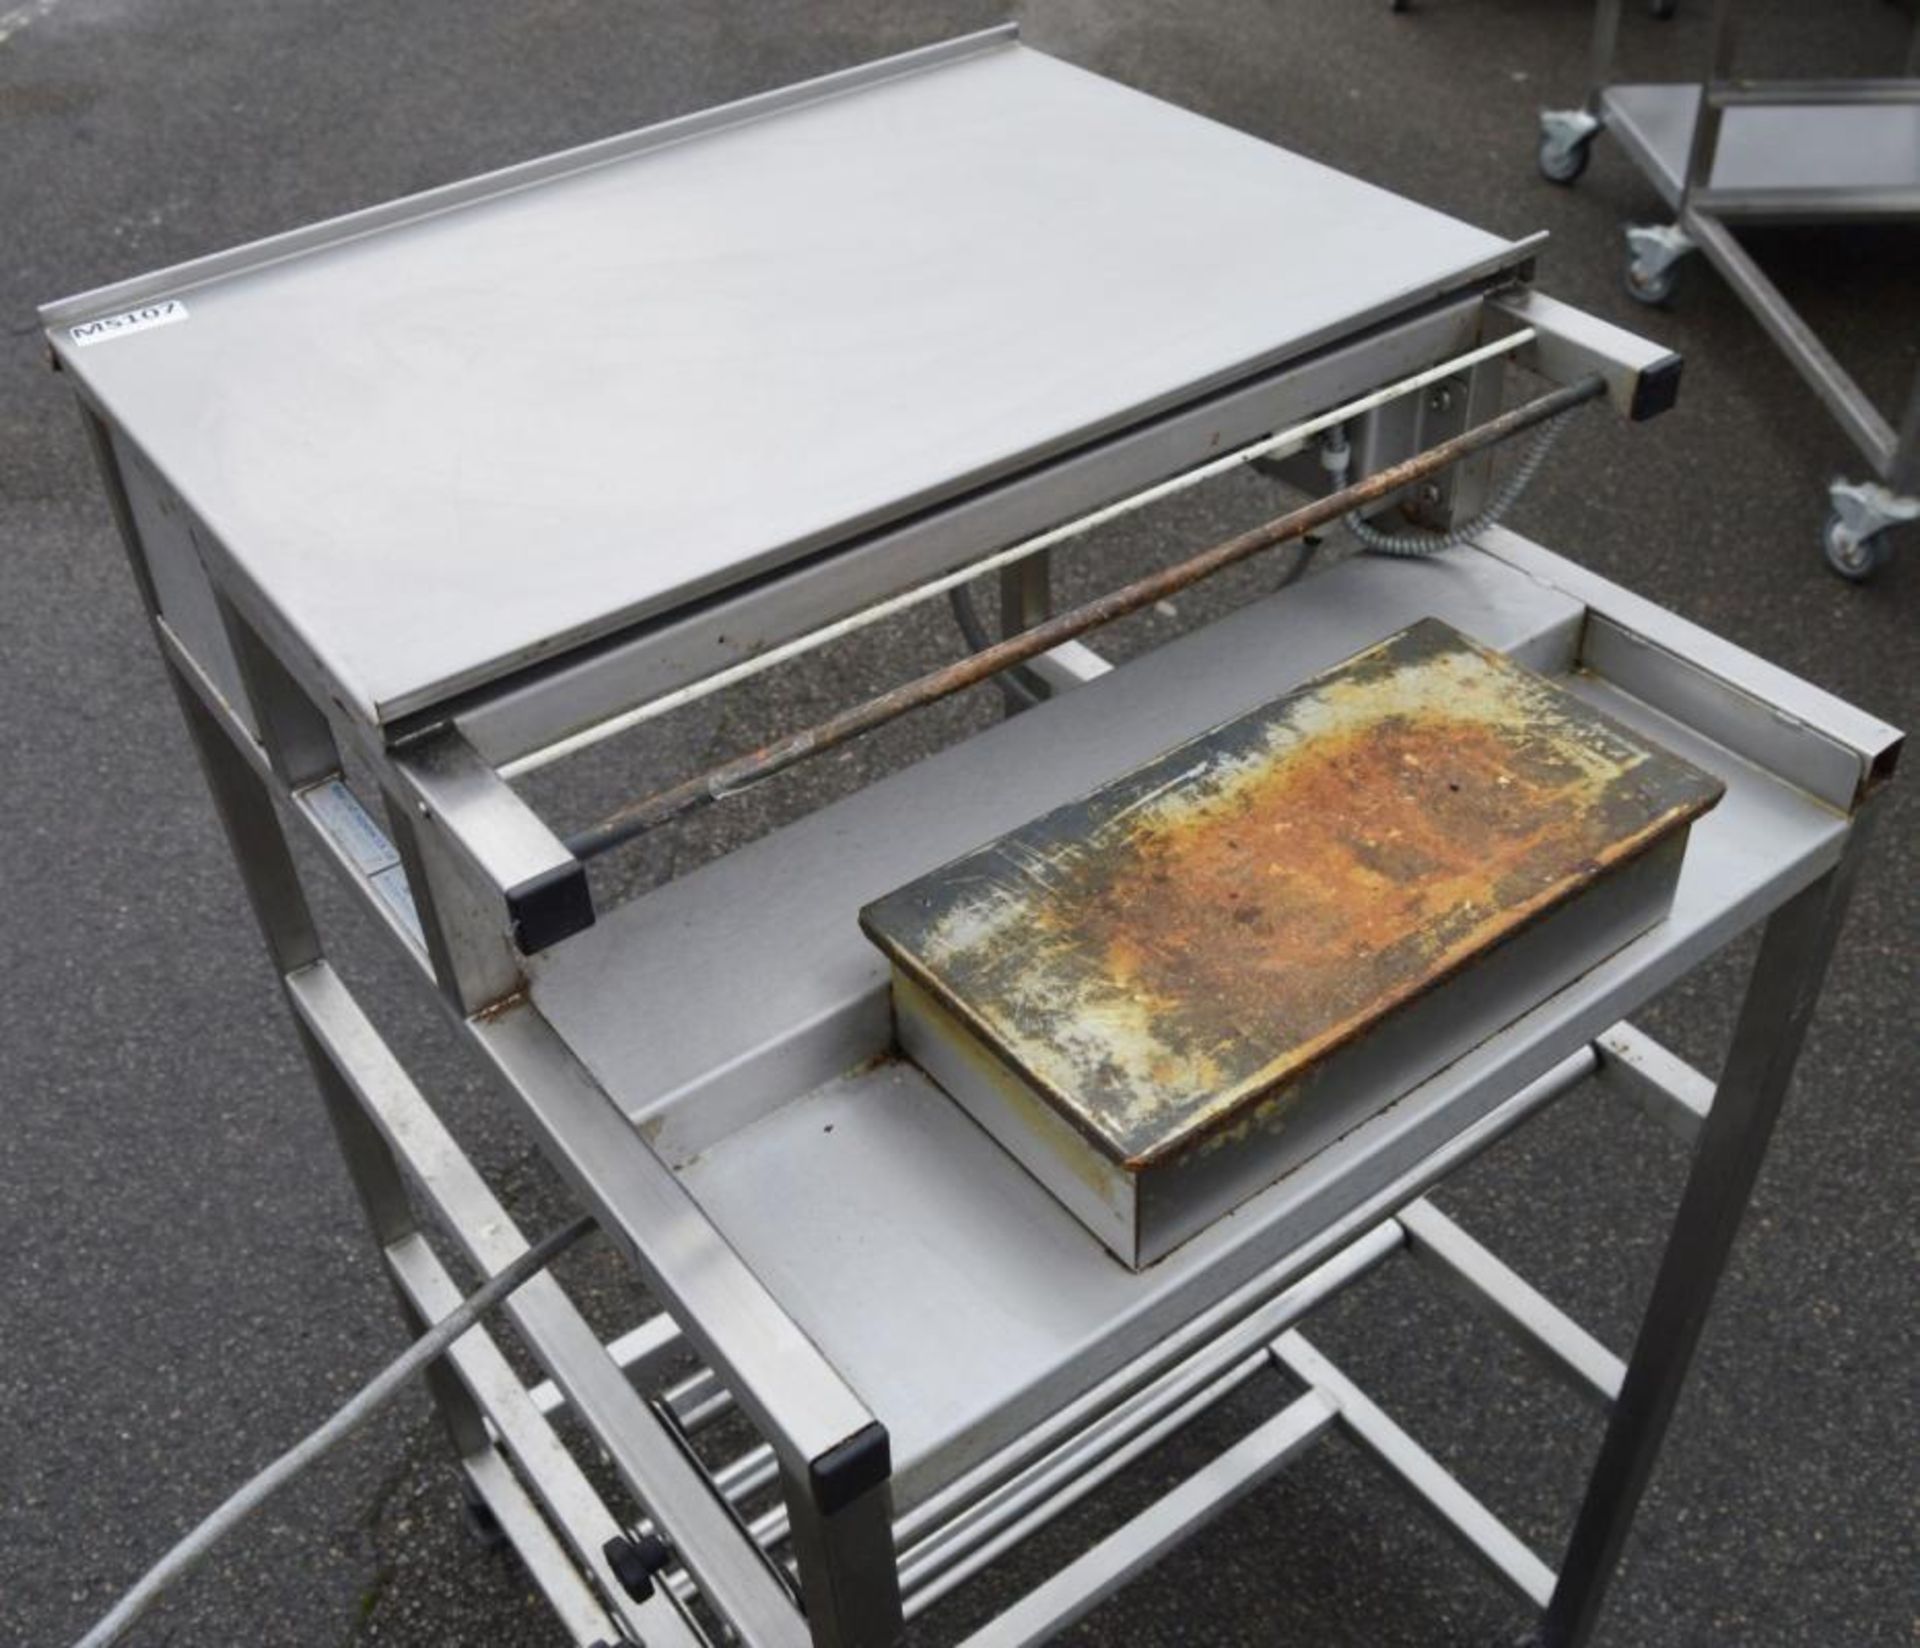 1 x Freestanding Stretch Wrap Tray Overwapper Machine - Stainless Steel Constructons - 240v - - Image 6 of 7